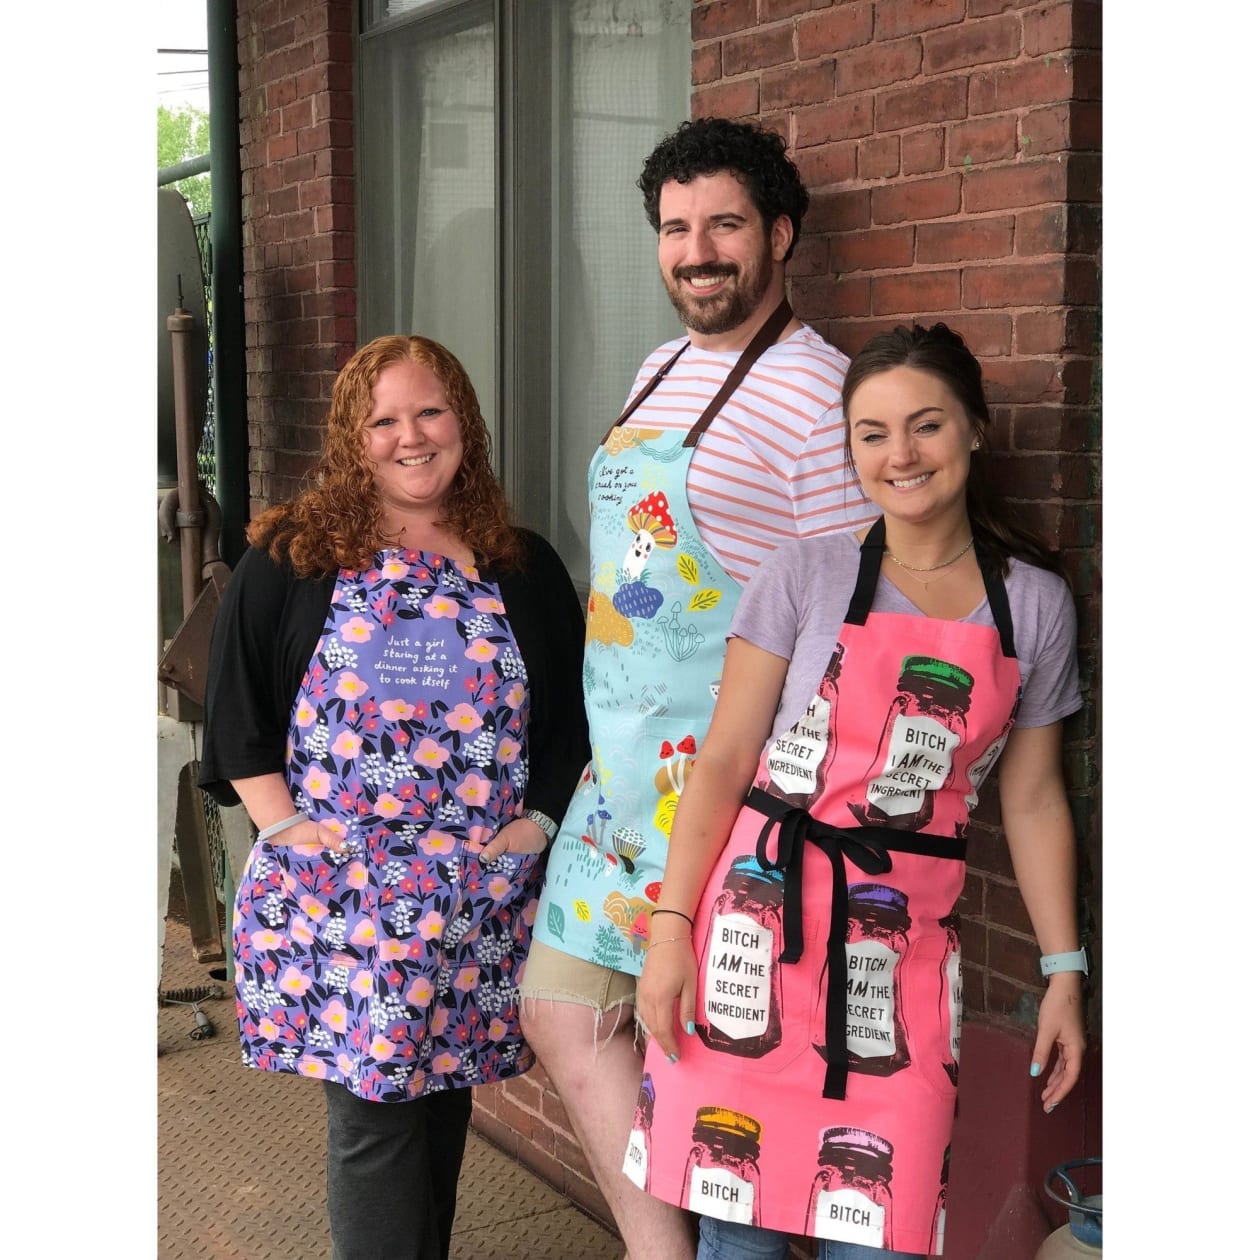 I've Got A Crush On Your Cooking Funny BlueQ Cooking and BBQ Apron Cute Mushroom and Toadstool Motif Unisex 2 Pockets Adjustable Strap 100% Cotton